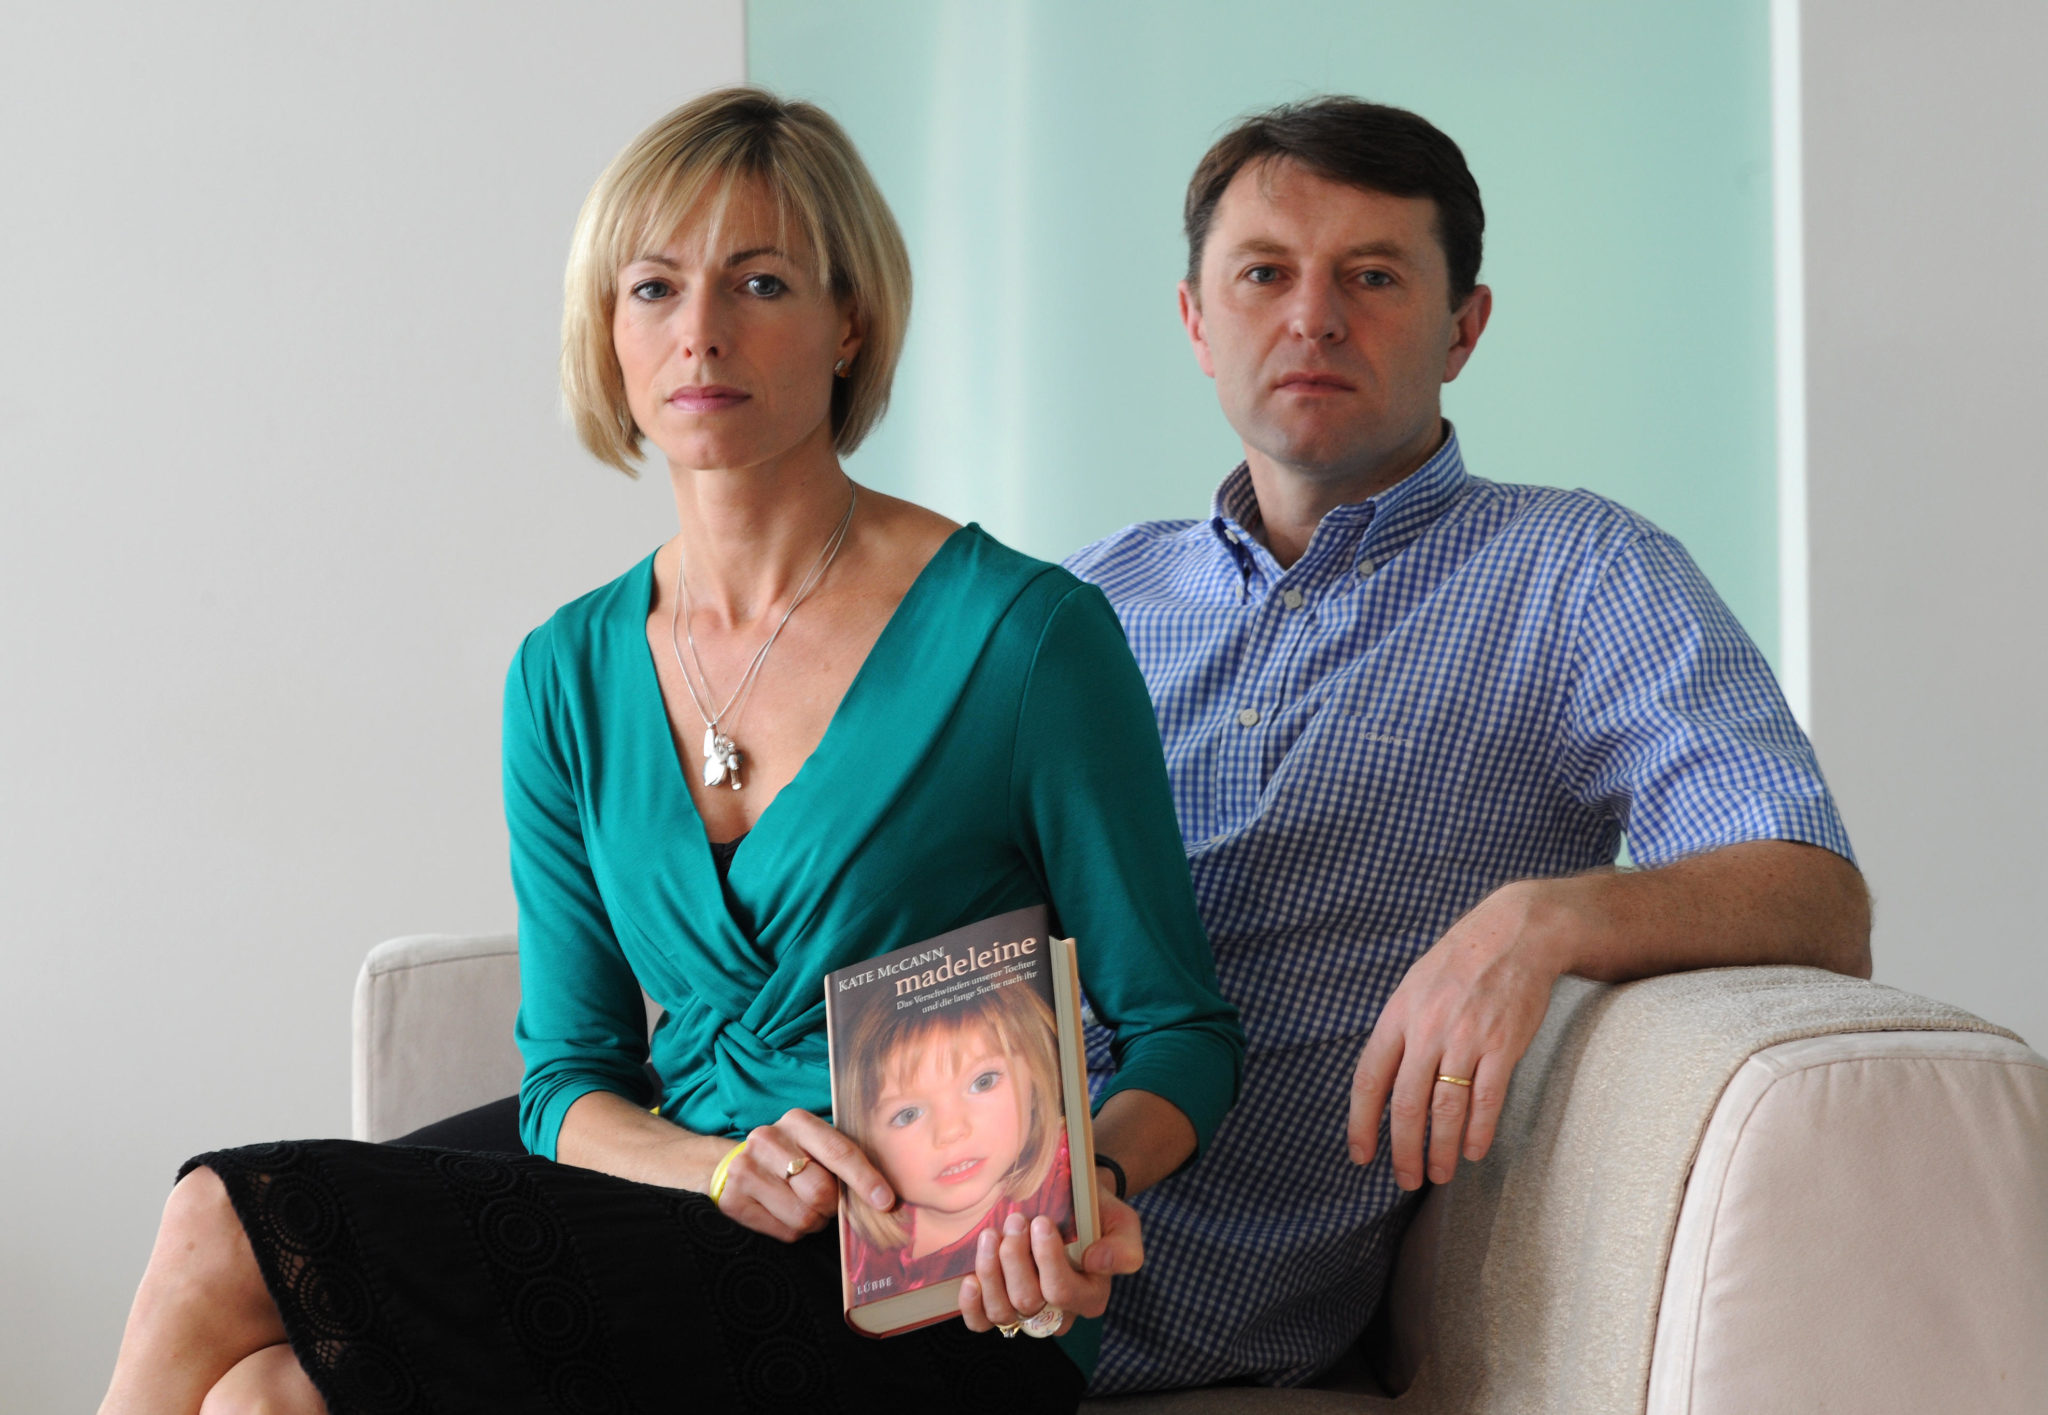 The parents of Madeleine McCann, Kate and Gerry McCann, present their new book at a hotel in Hamburg, Germany, 16-09-2011. Image: dpa picture alliance archive / Alamy Stock Photo